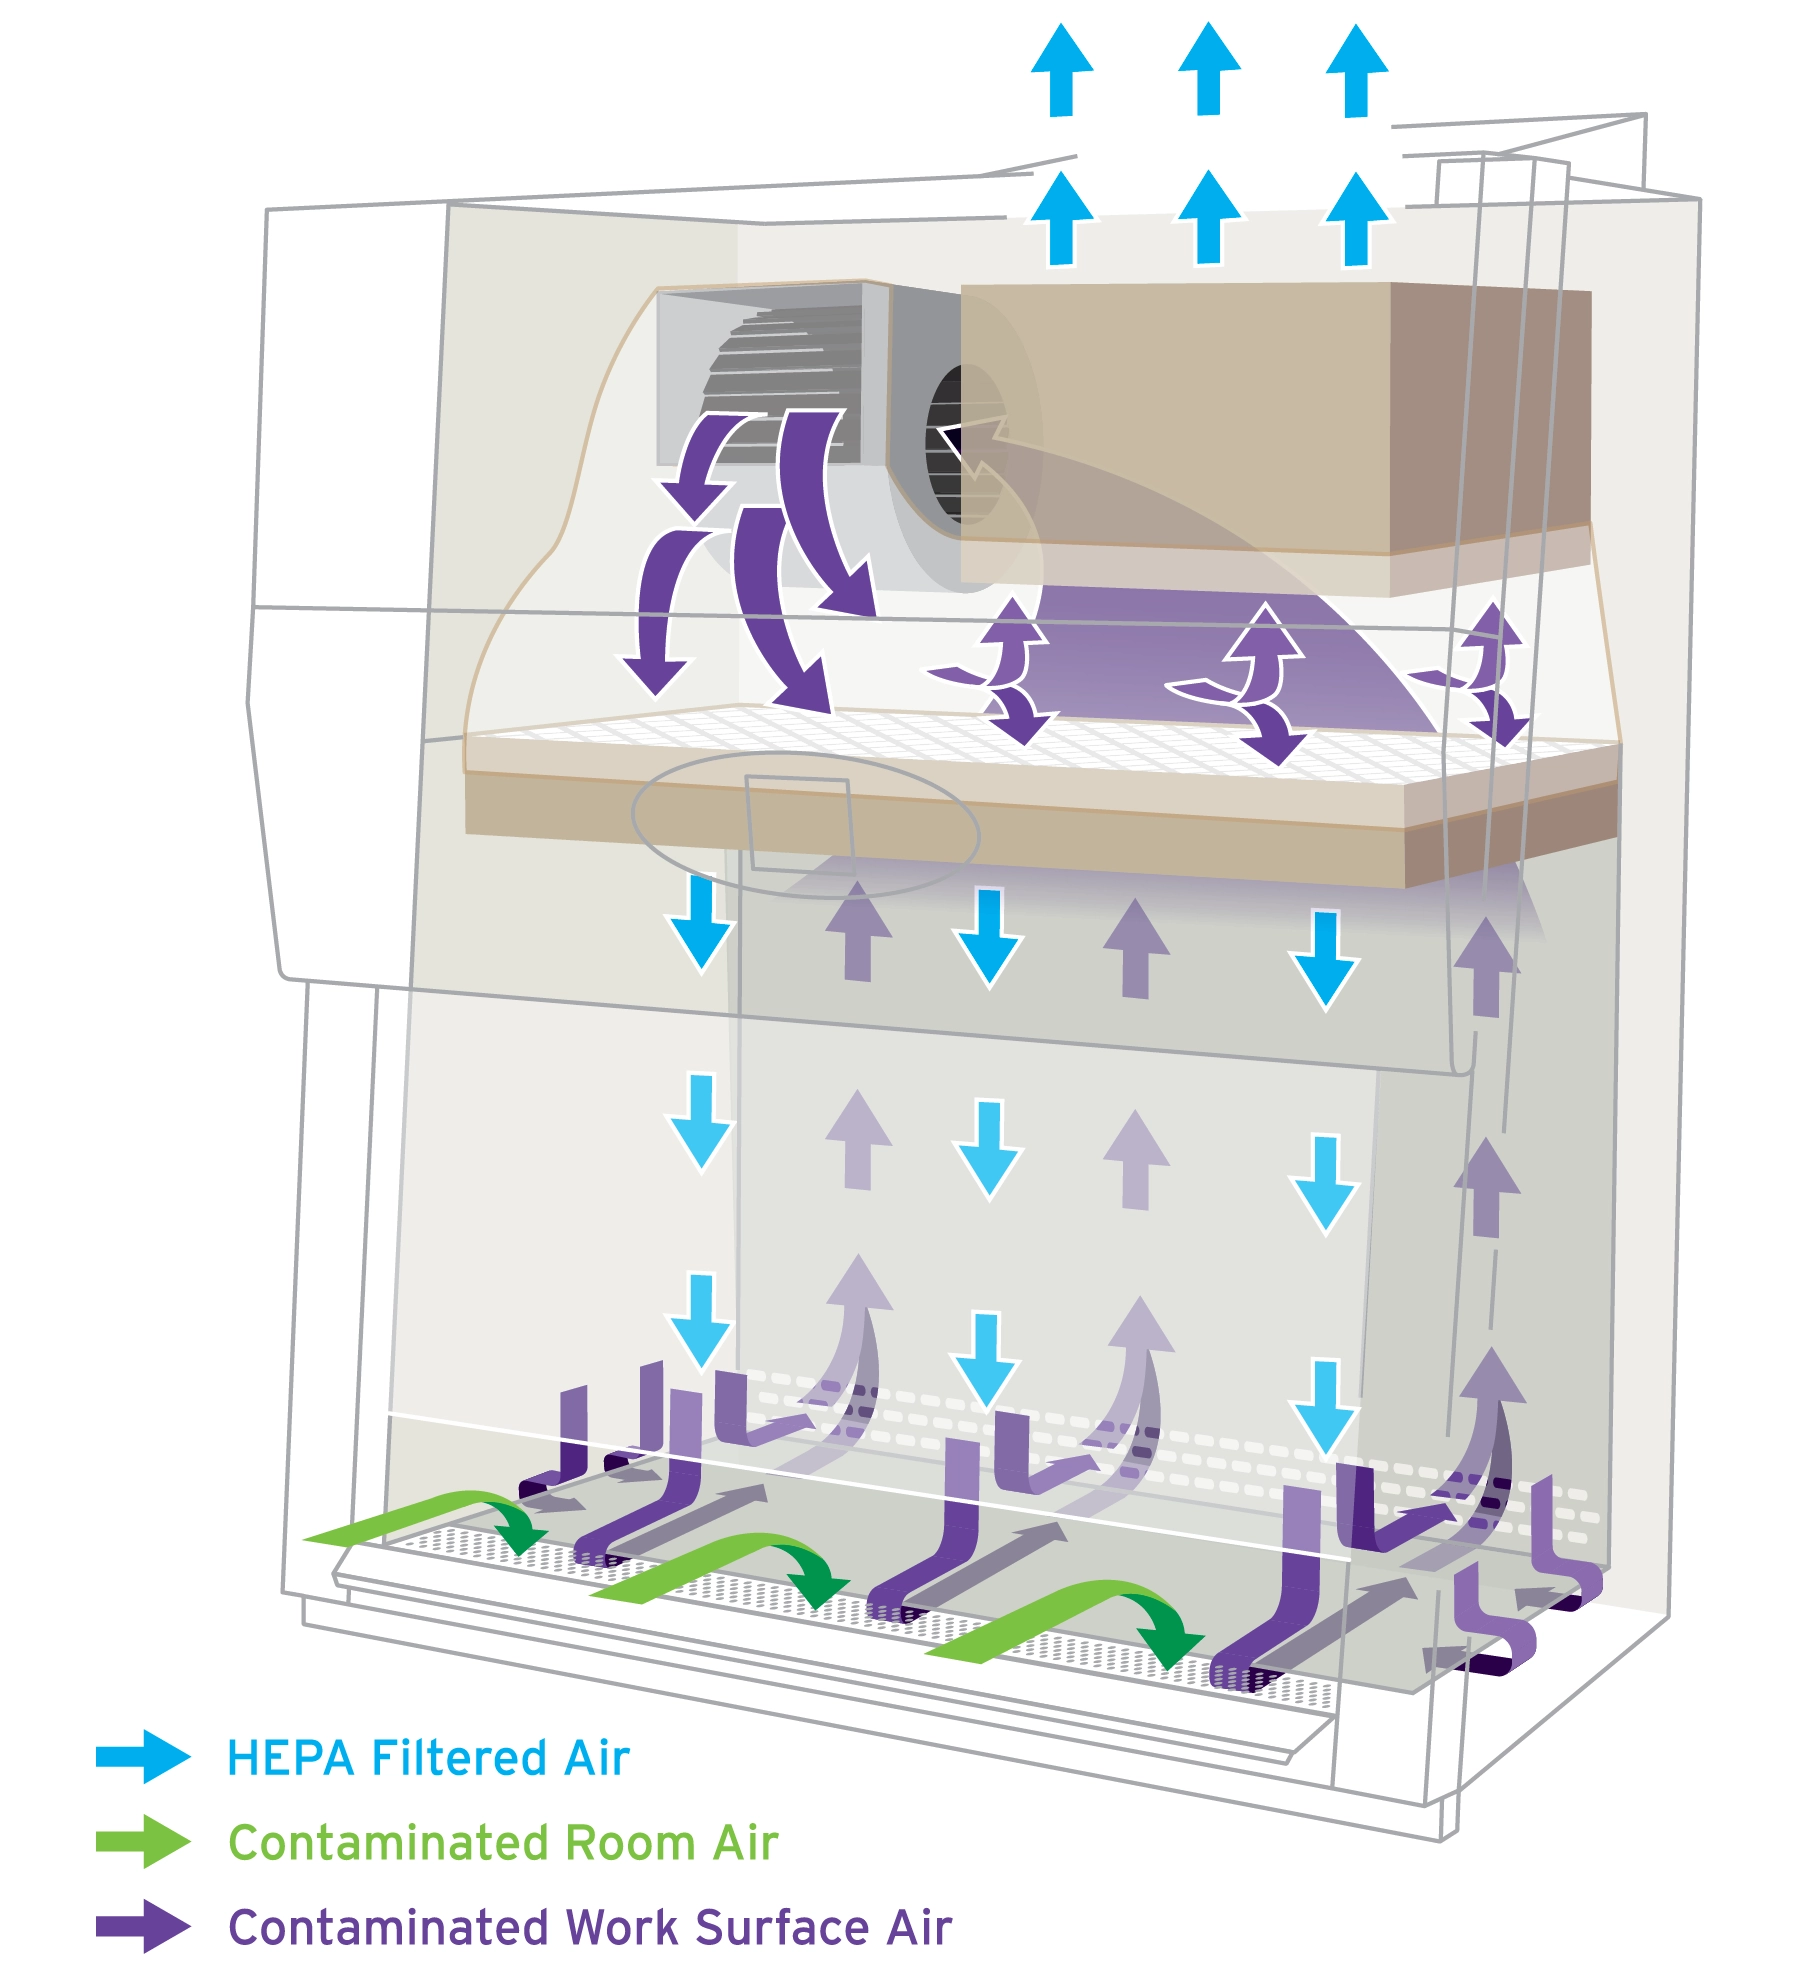 Diagram of Class II, Type A2 Biosafety Cabinet Airflow Dynamics